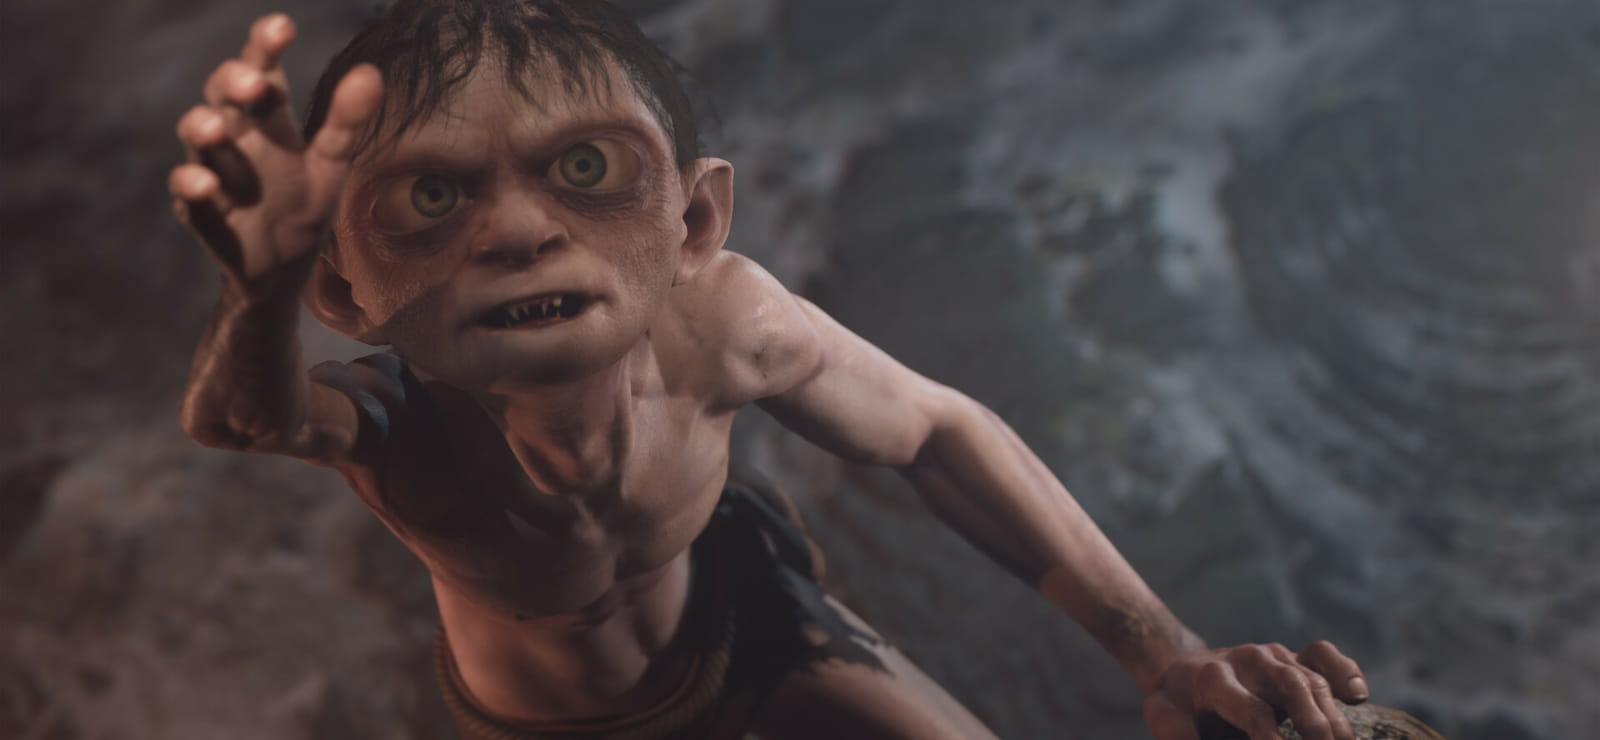 The Lord Of The Rings: Gollum™ - Emotes Pack